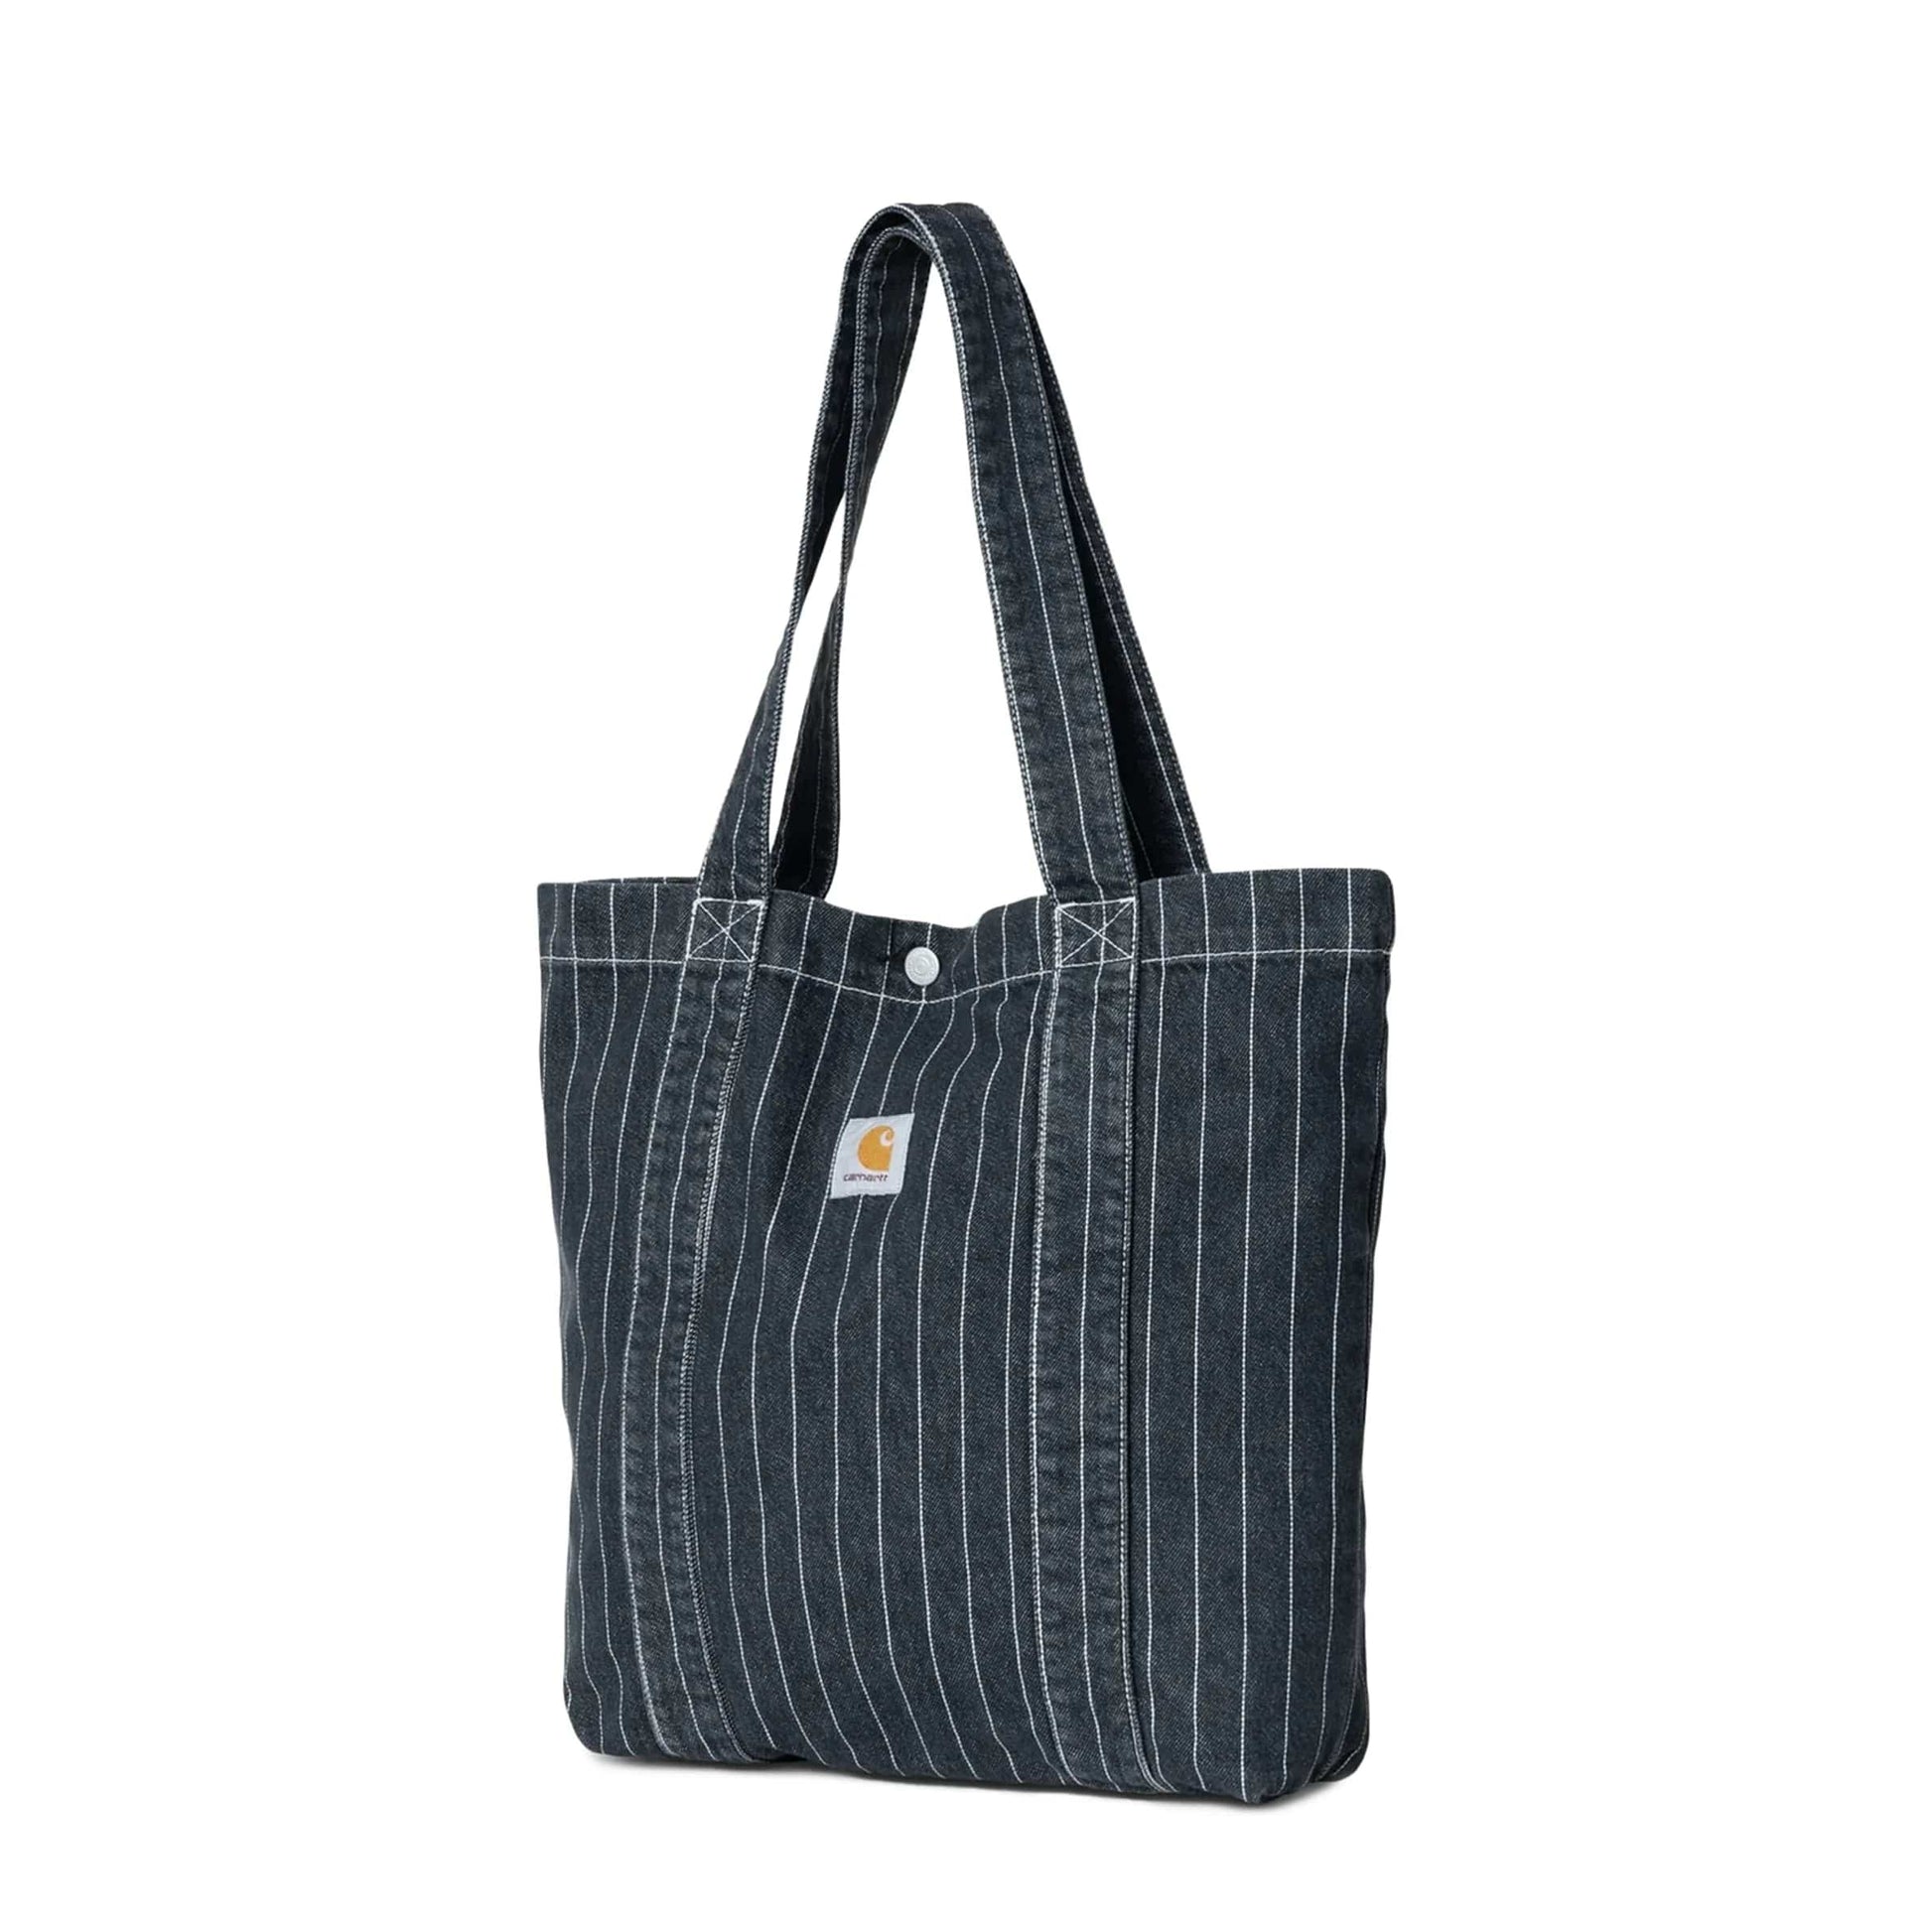 Carhartt WIP Bags ORLEAN STRIPE, BLACK WHITE (STONE WASHED) / O/S ORLEANS TOTE BAG